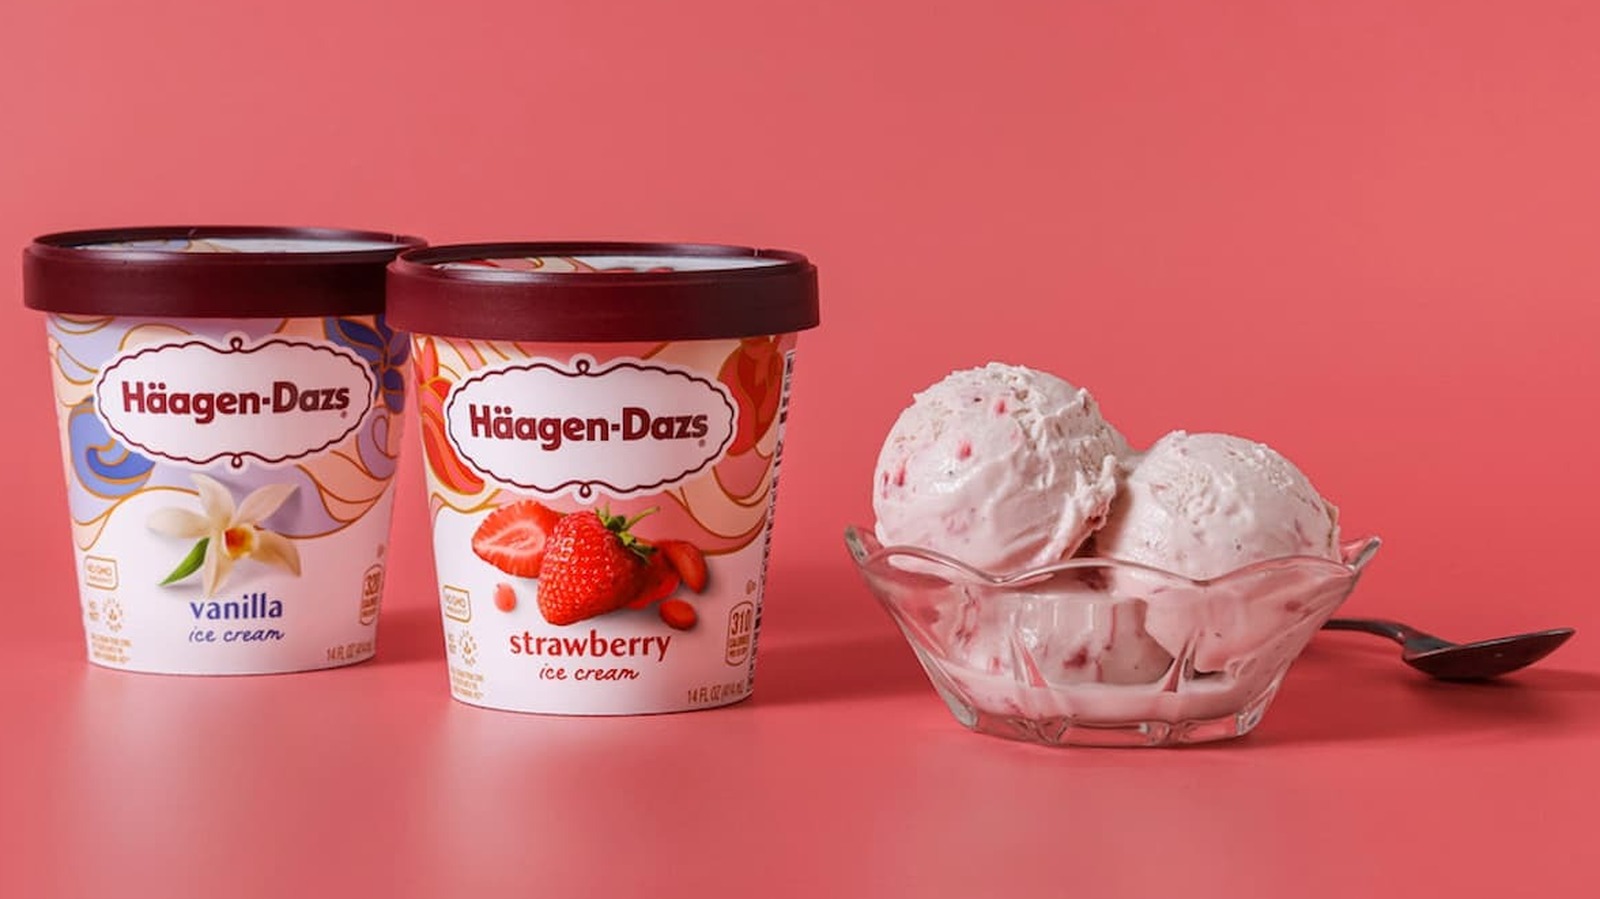 The Birthplace Of Häagen-Dazs Isn't Where You'd Expect